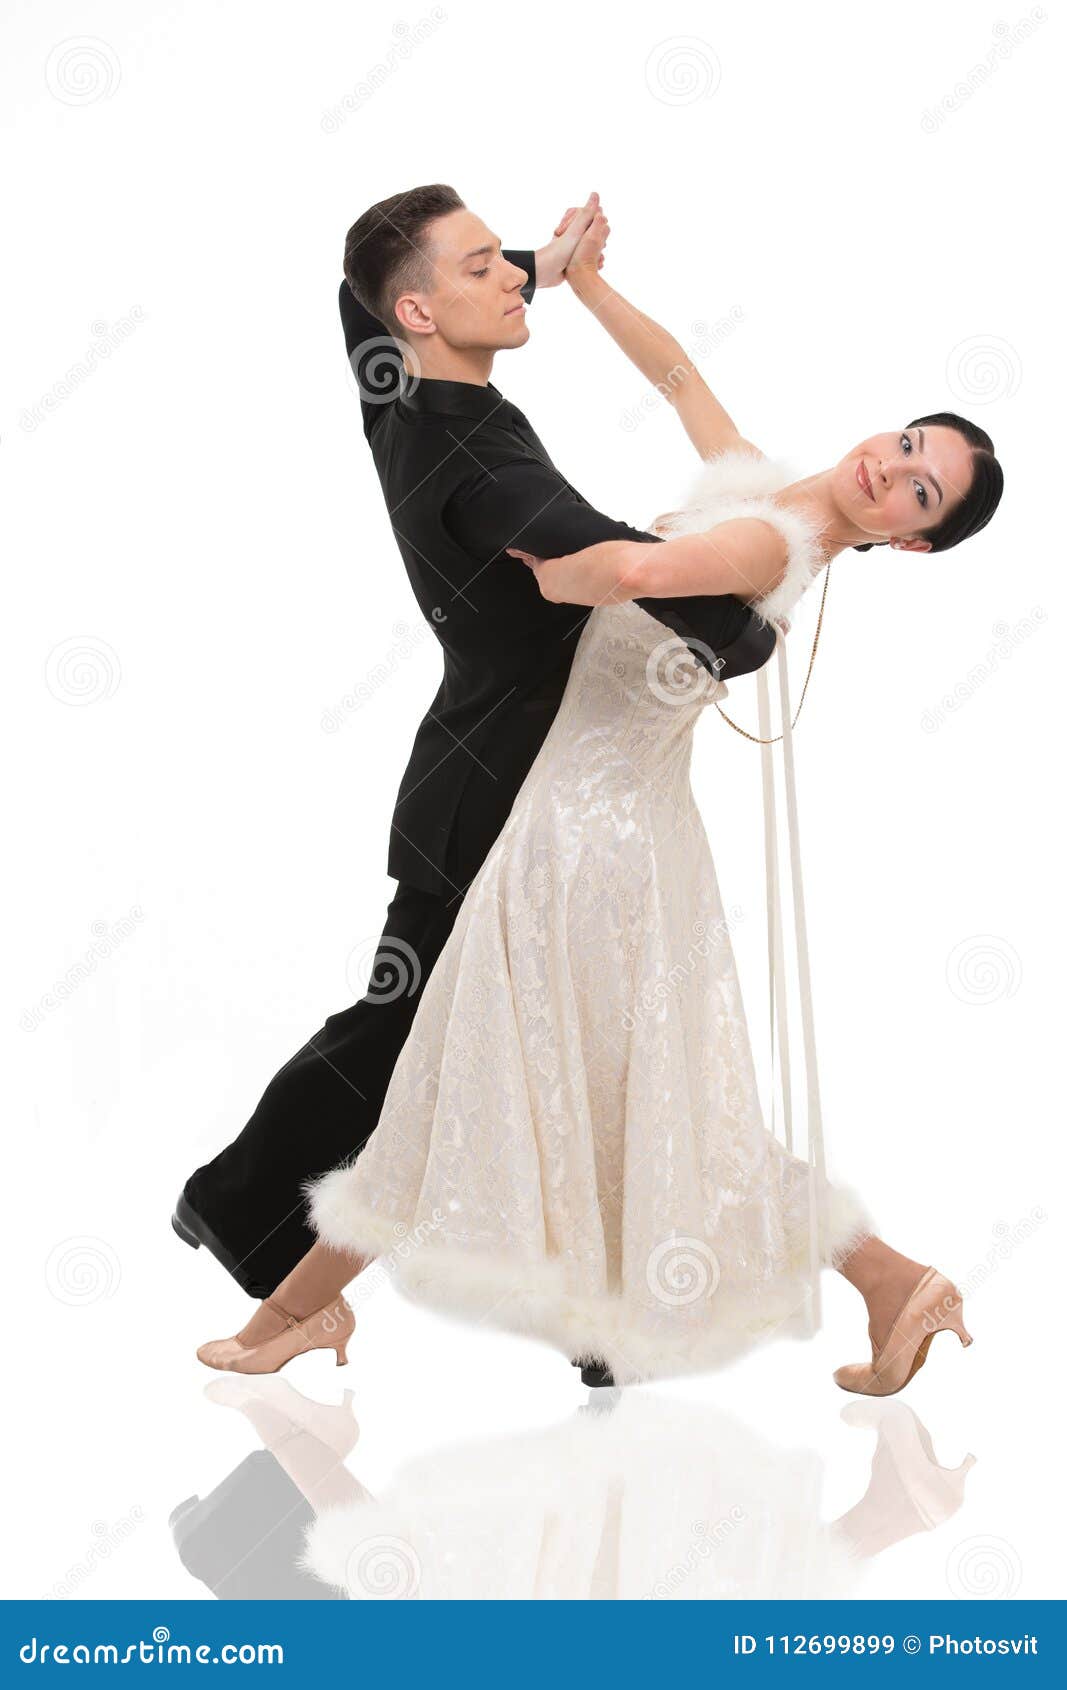 Couple Waltz Dancing Pose: Over 4,264 Royalty-Free Licensable Stock Photos  | Shutterstock